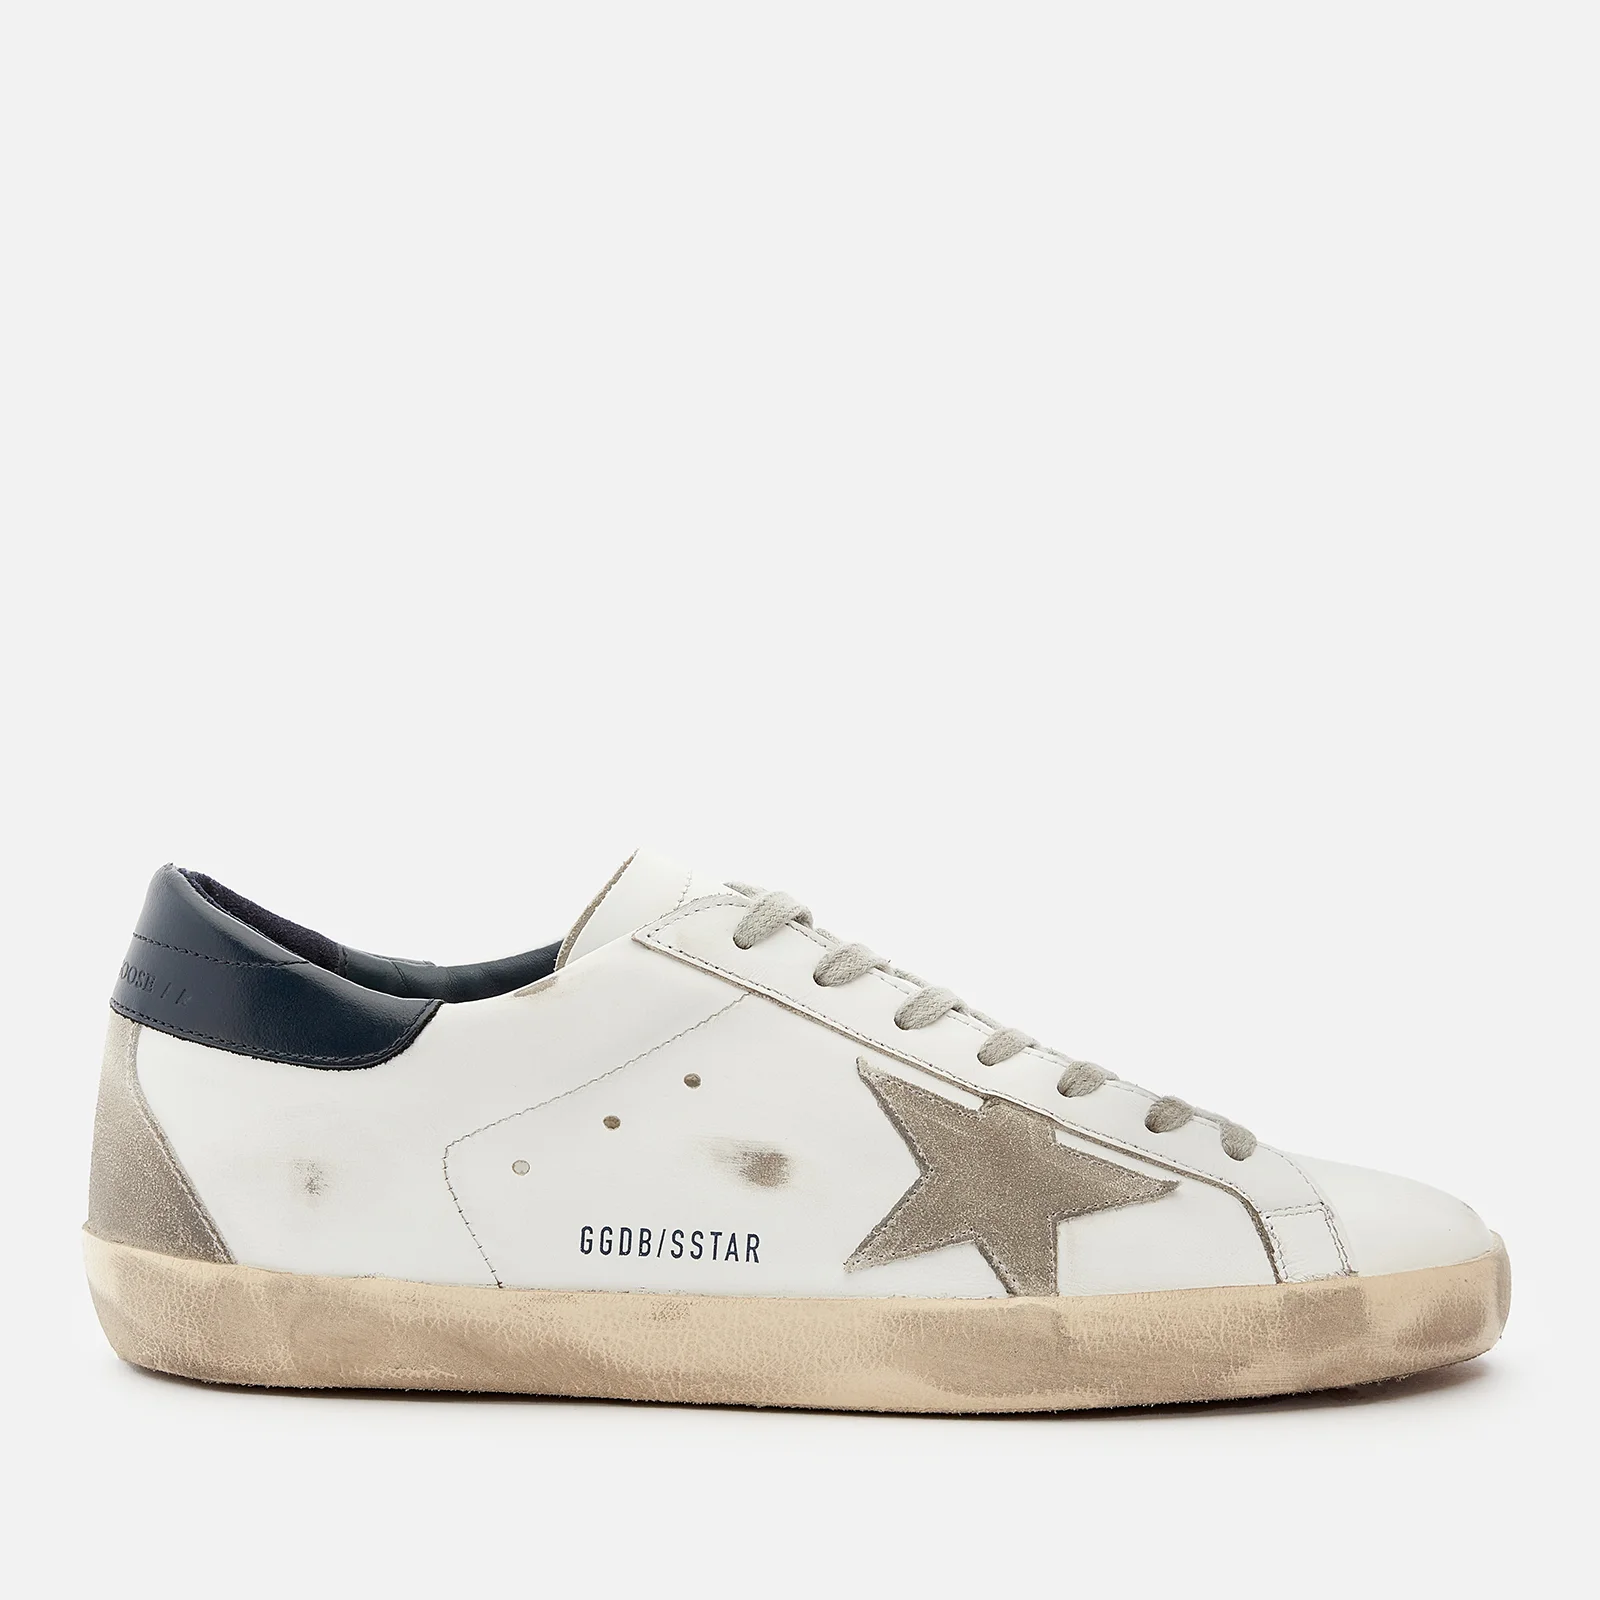 Golden Goose Men's Superstar Leather Trainers - White/Ice/Night Blue Image 1